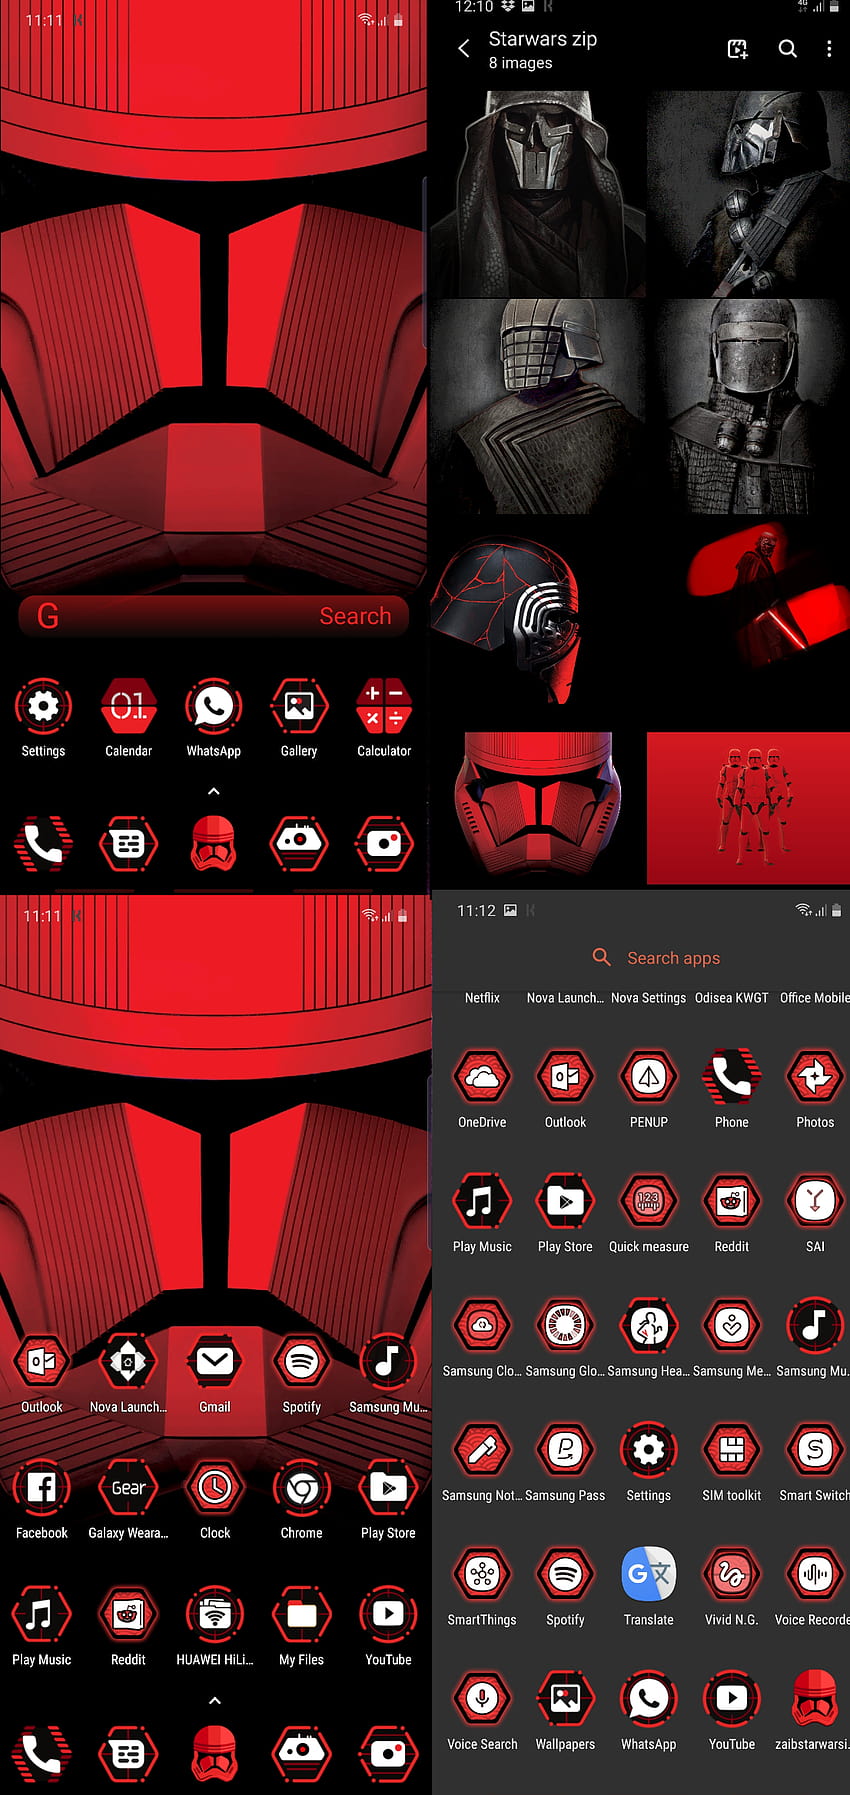 STARWARS EDITION NOTE 10 PLUS theme apk with its original sms and ringtone and link in comments. ♡ENJOY♡ : Note10 HD phone wallpaper